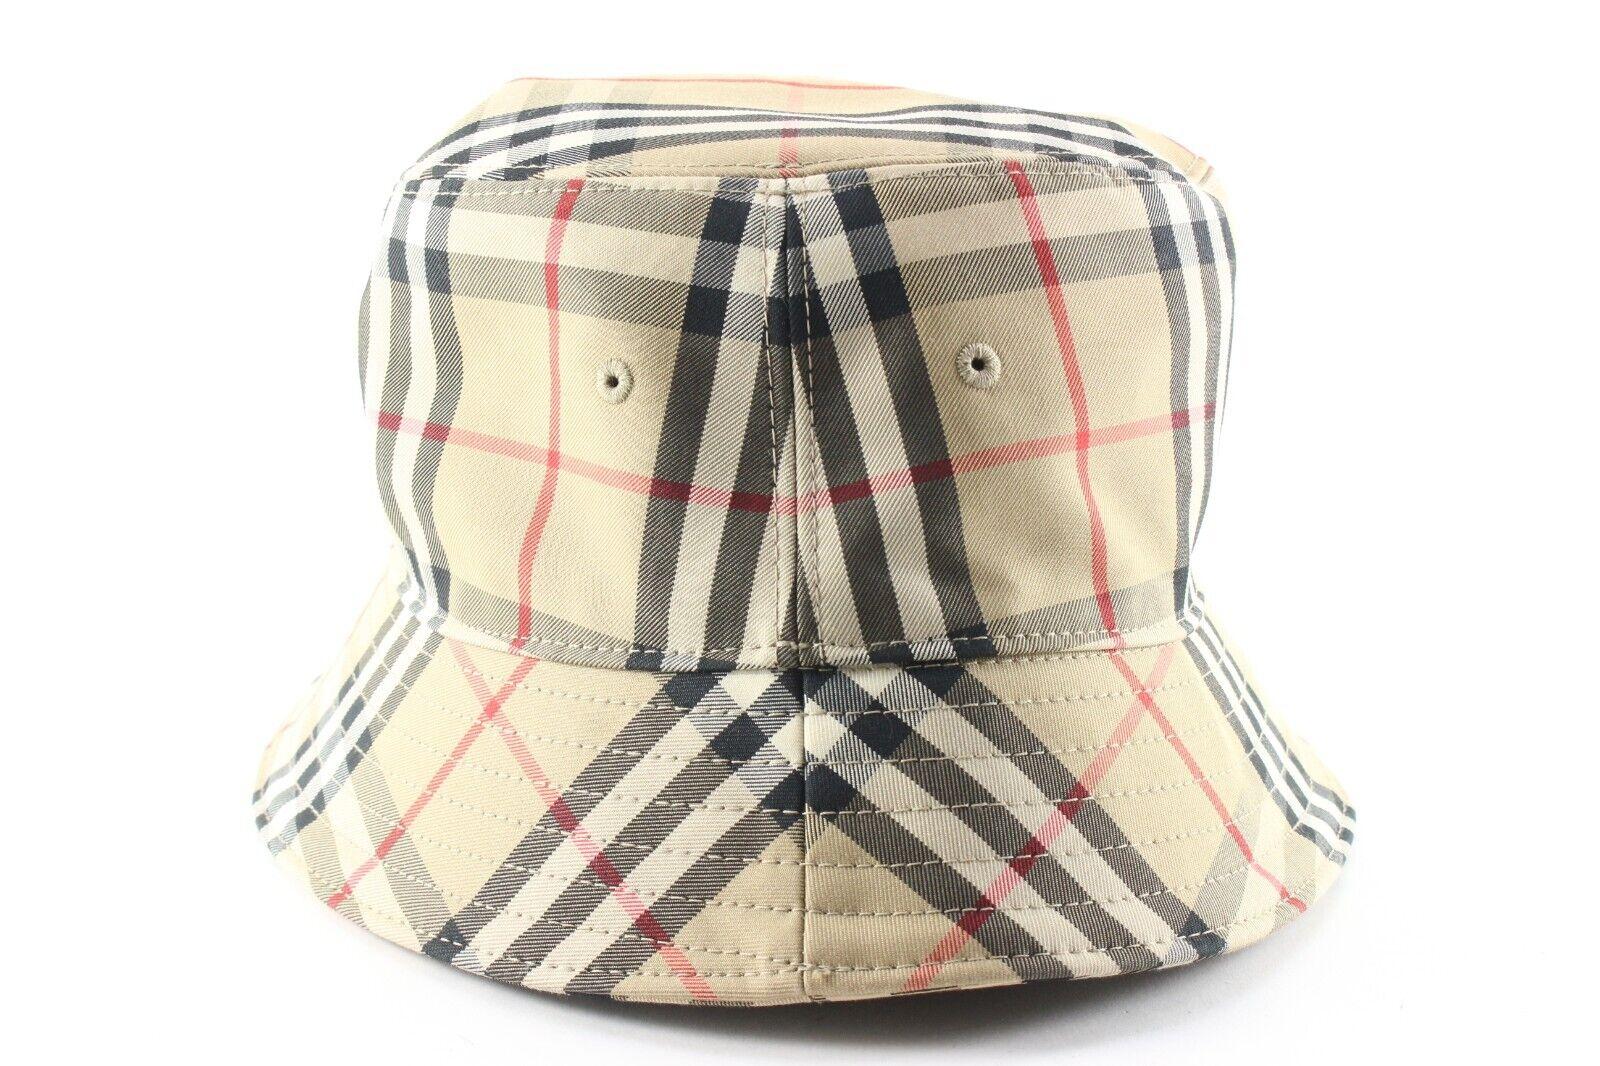 Burberry Nova Check Bucket Hat Fisherman 1BUR523K In Excellent Condition For Sale In Dix hills, NY